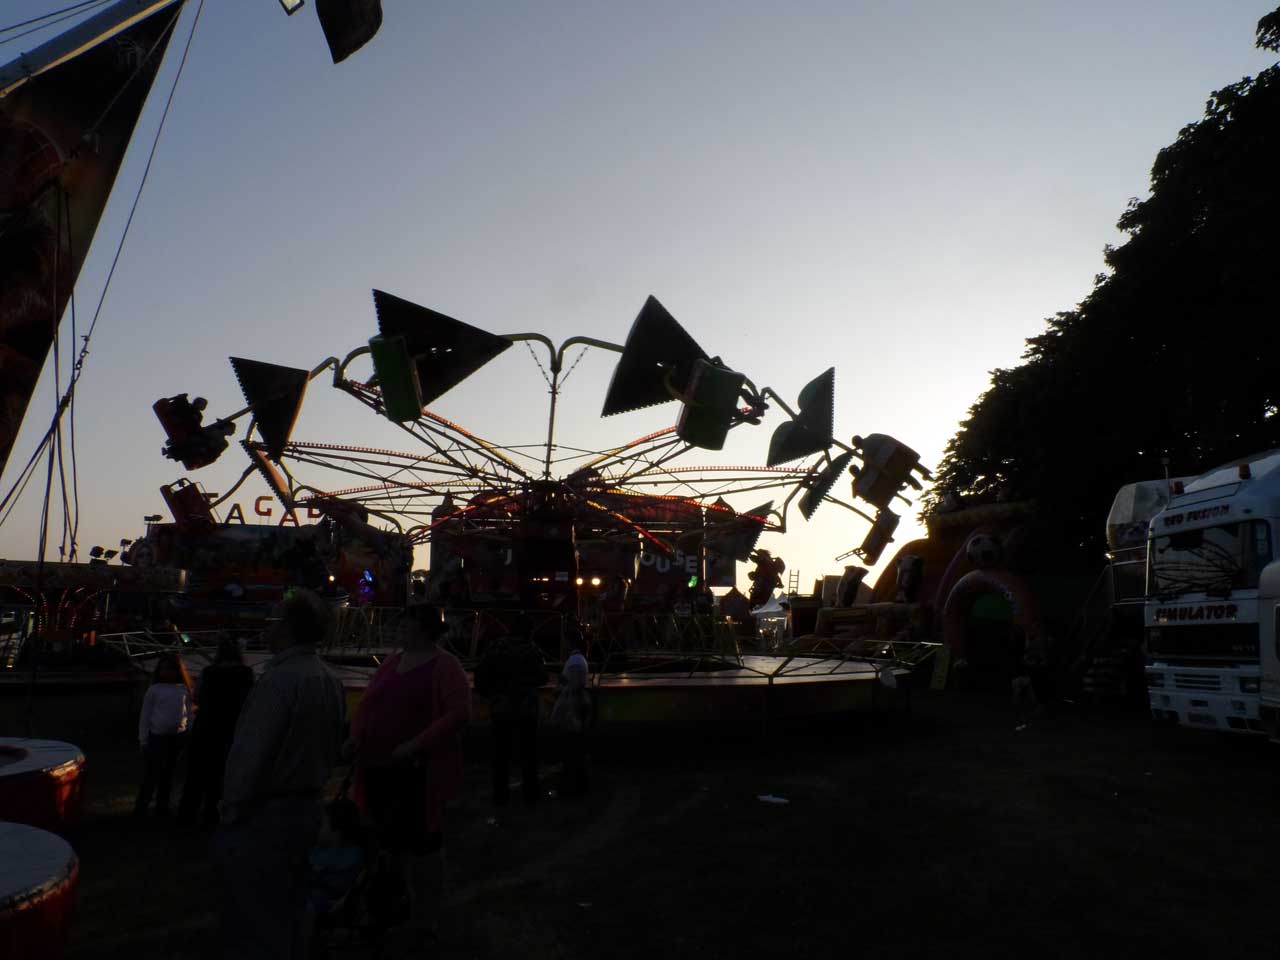 Photo: Caithness County Show 2013 - Friday Evening